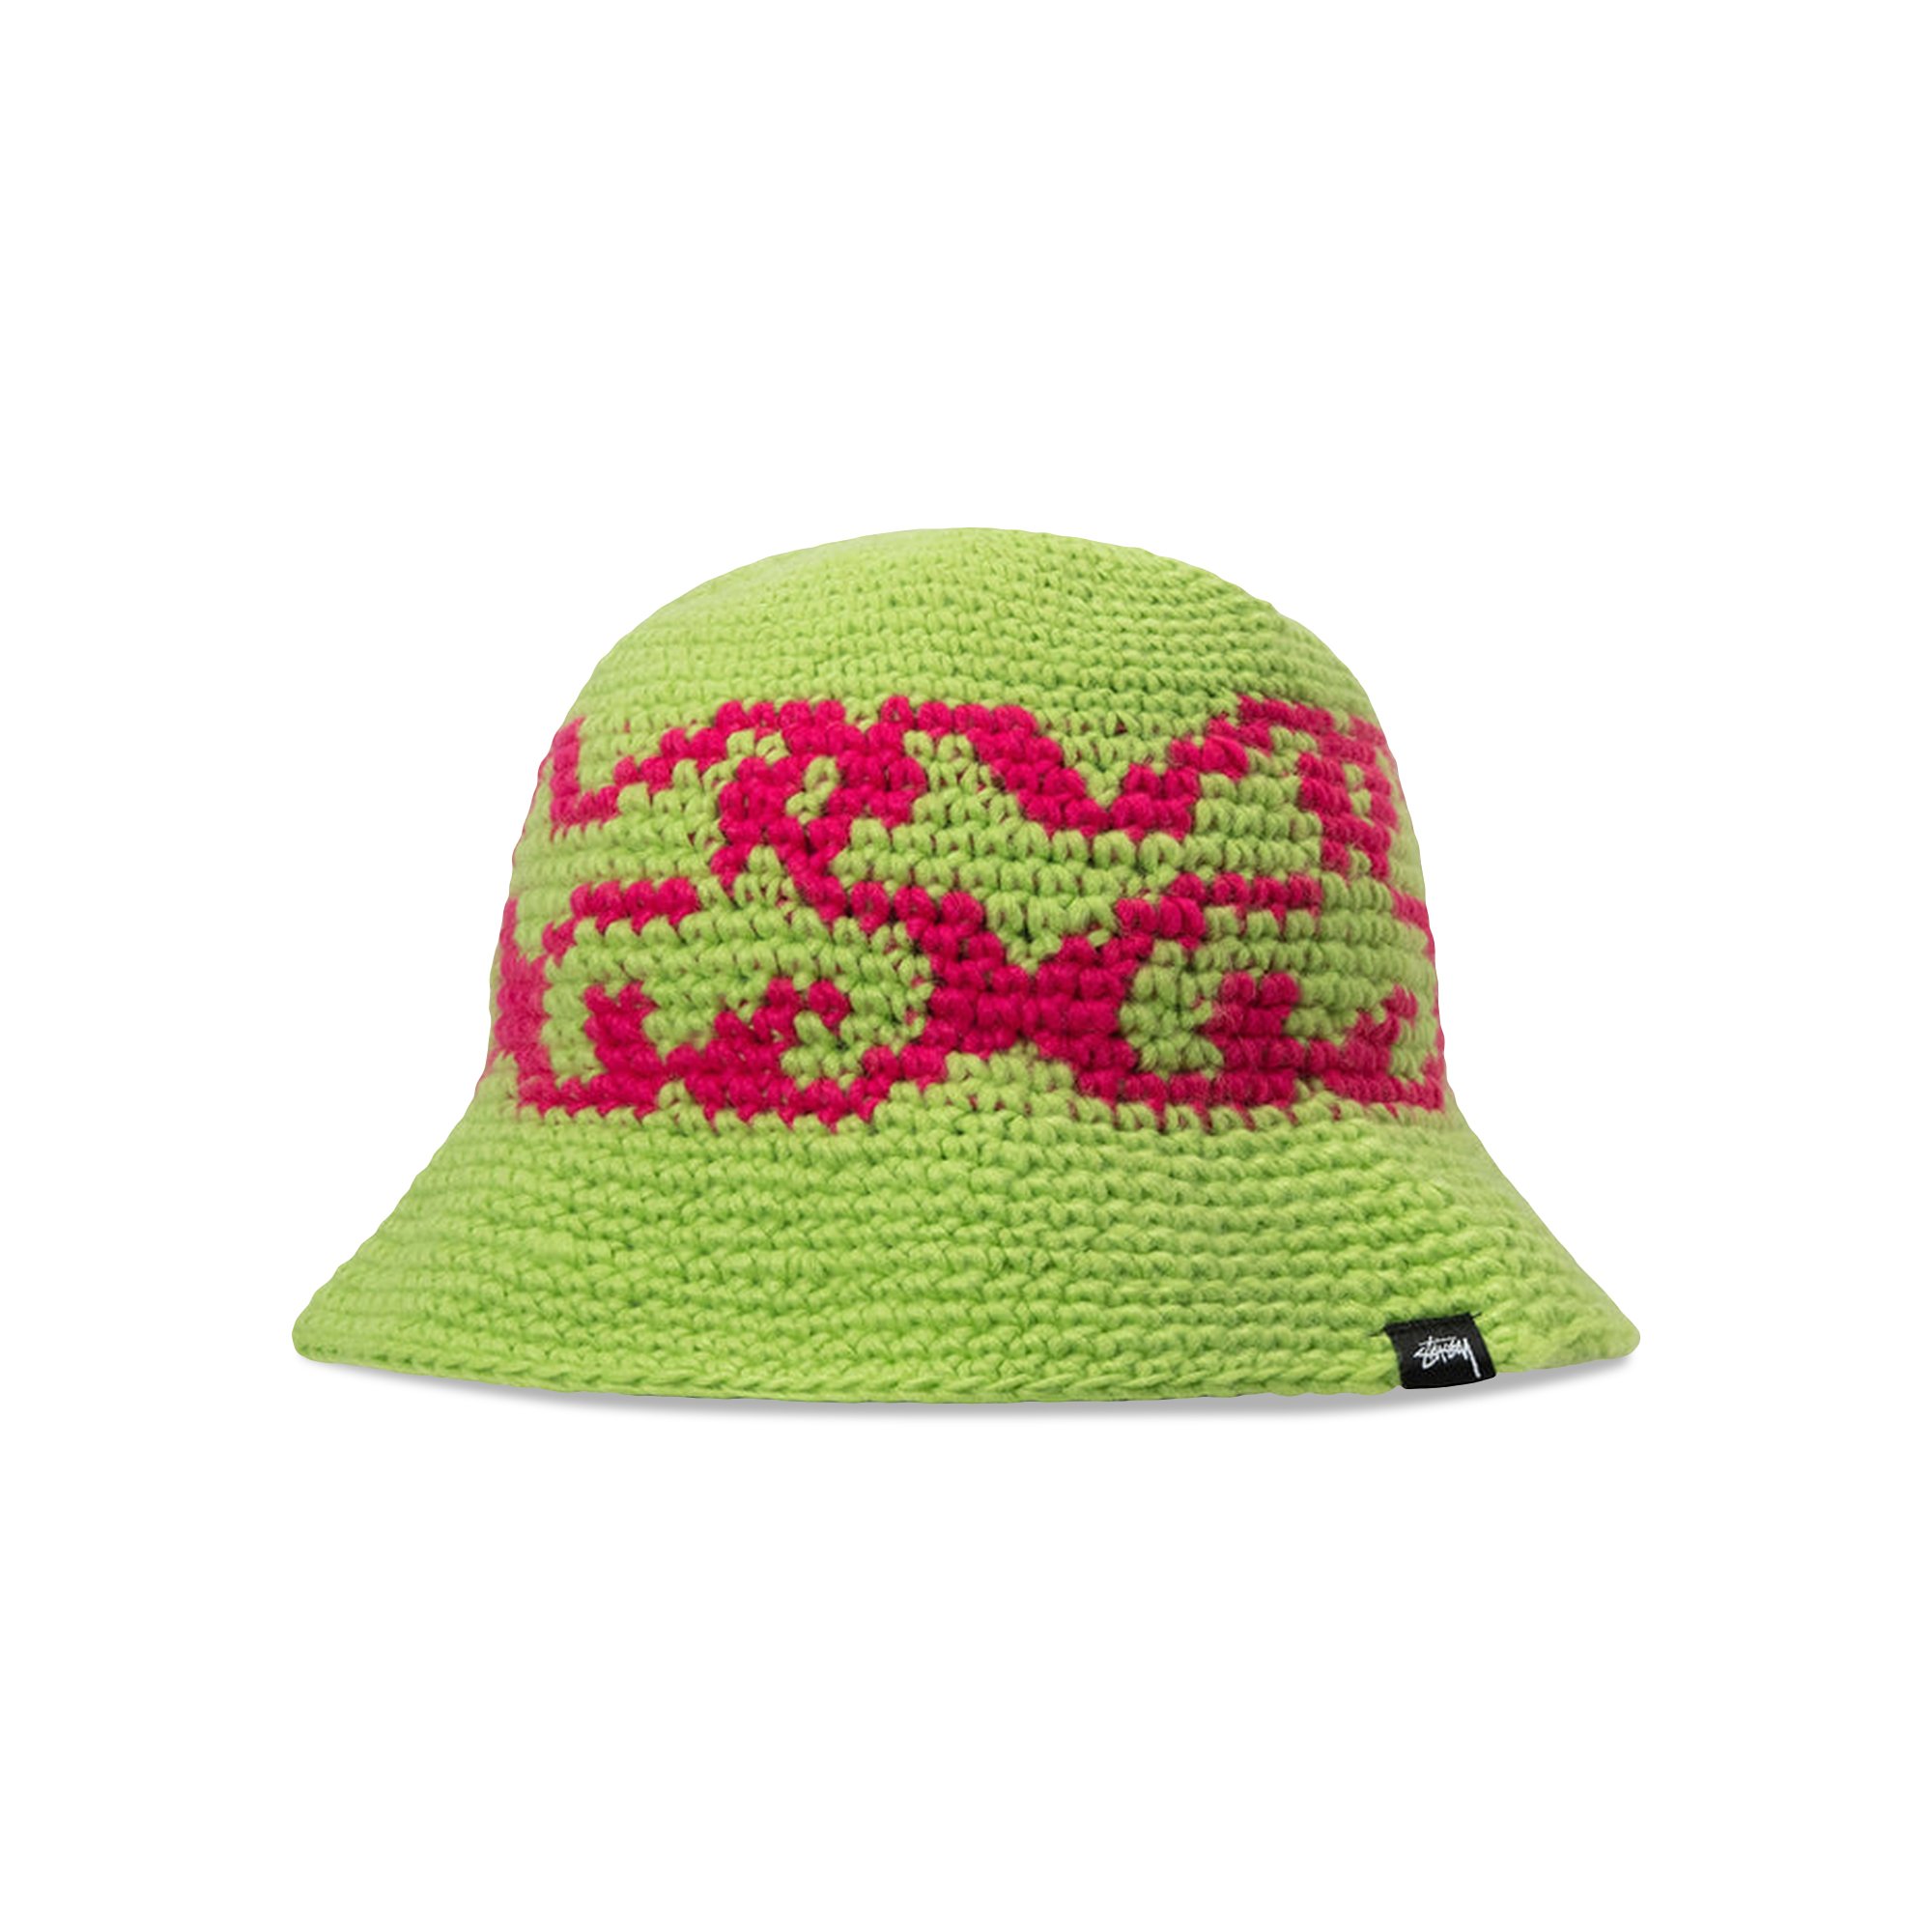 Buy Stussy SS Knit Bucket Hat 'Lime' - 1321125 LIME | GOAT